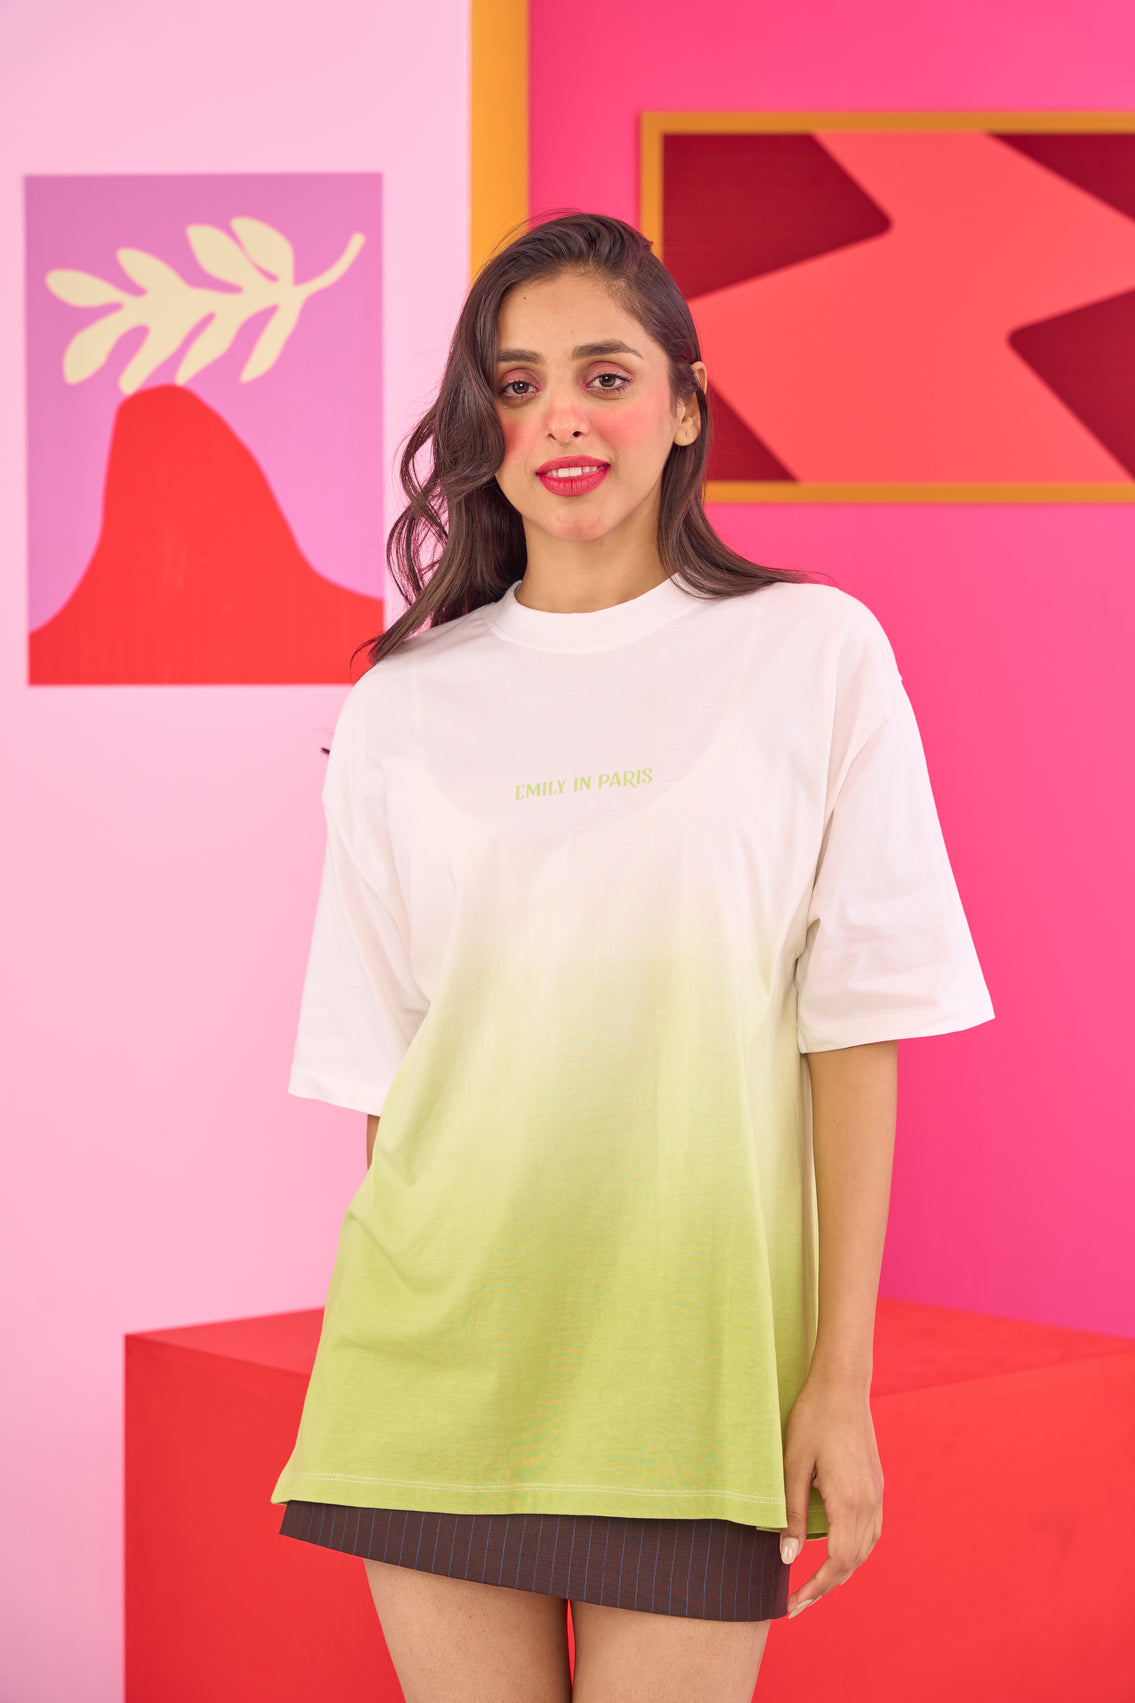 Emily in Paris: Green Ombre Oversized T-shirt